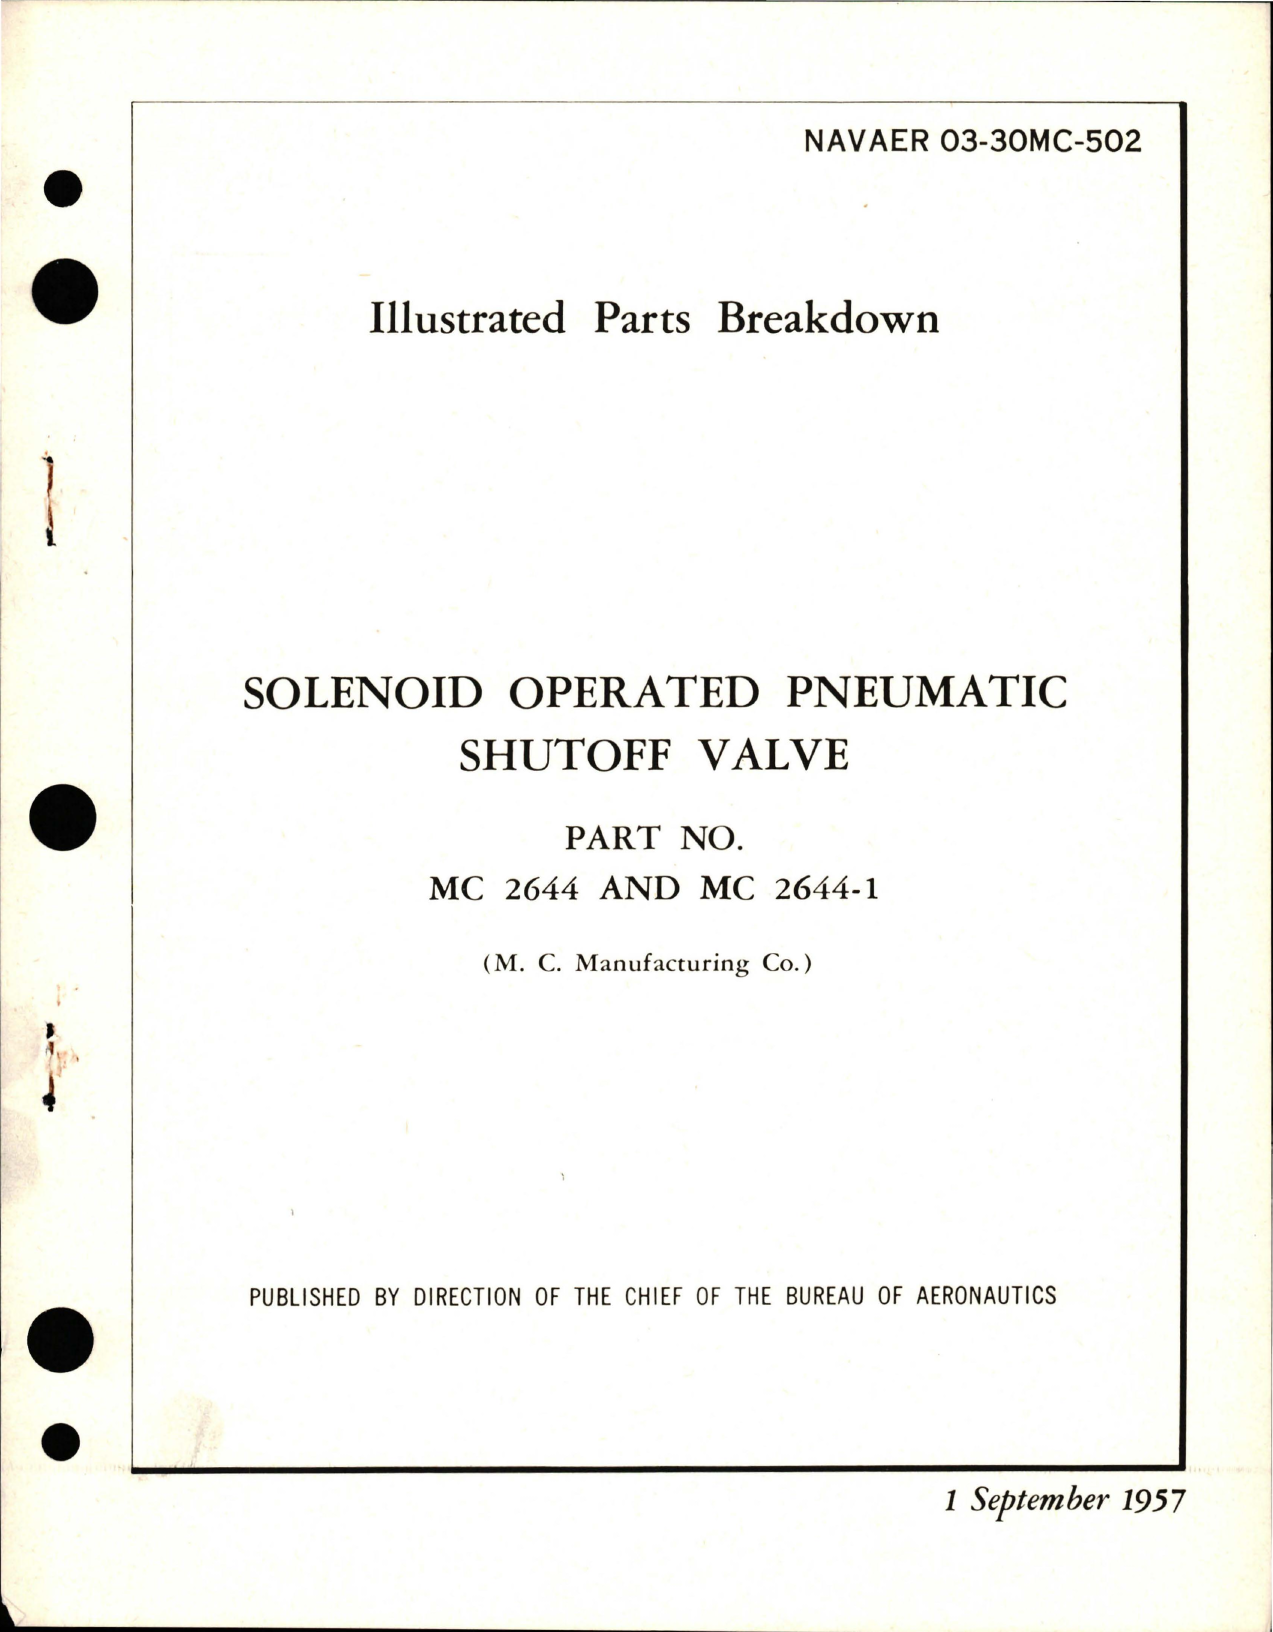 Sample page 1 from AirCorps Library document: Illustrated Parts Breakdown for Solenoid Operated Pneumatic Shutoff Valve - Parts MV 2644 and NC2644-1 